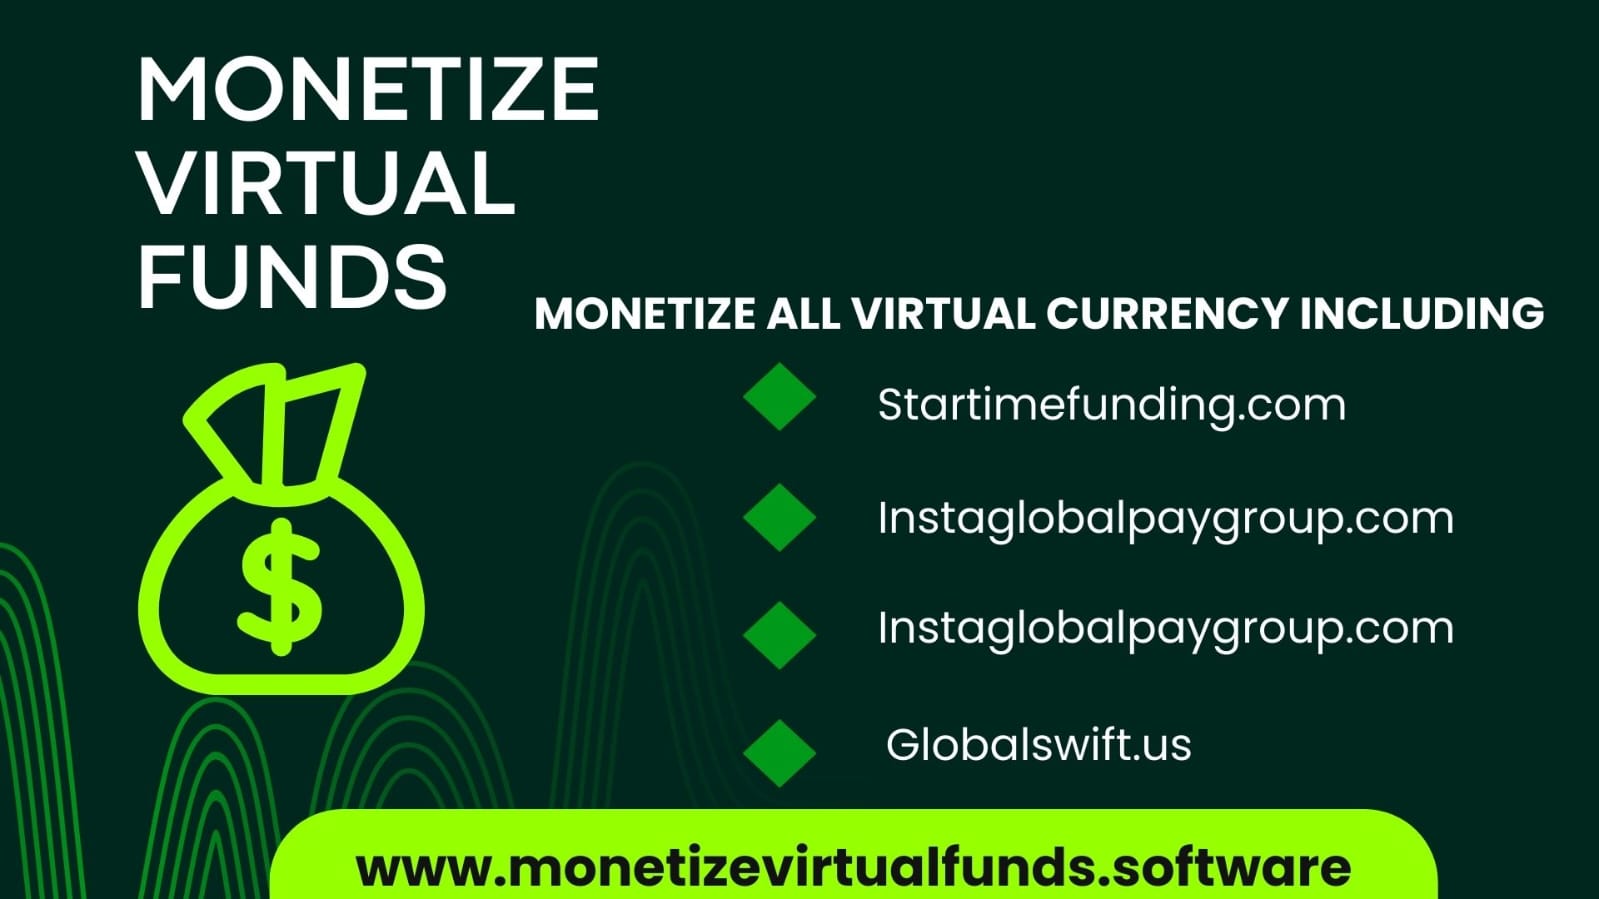 monetize-all-virtual-currencies-with-monetize-virtual-funds